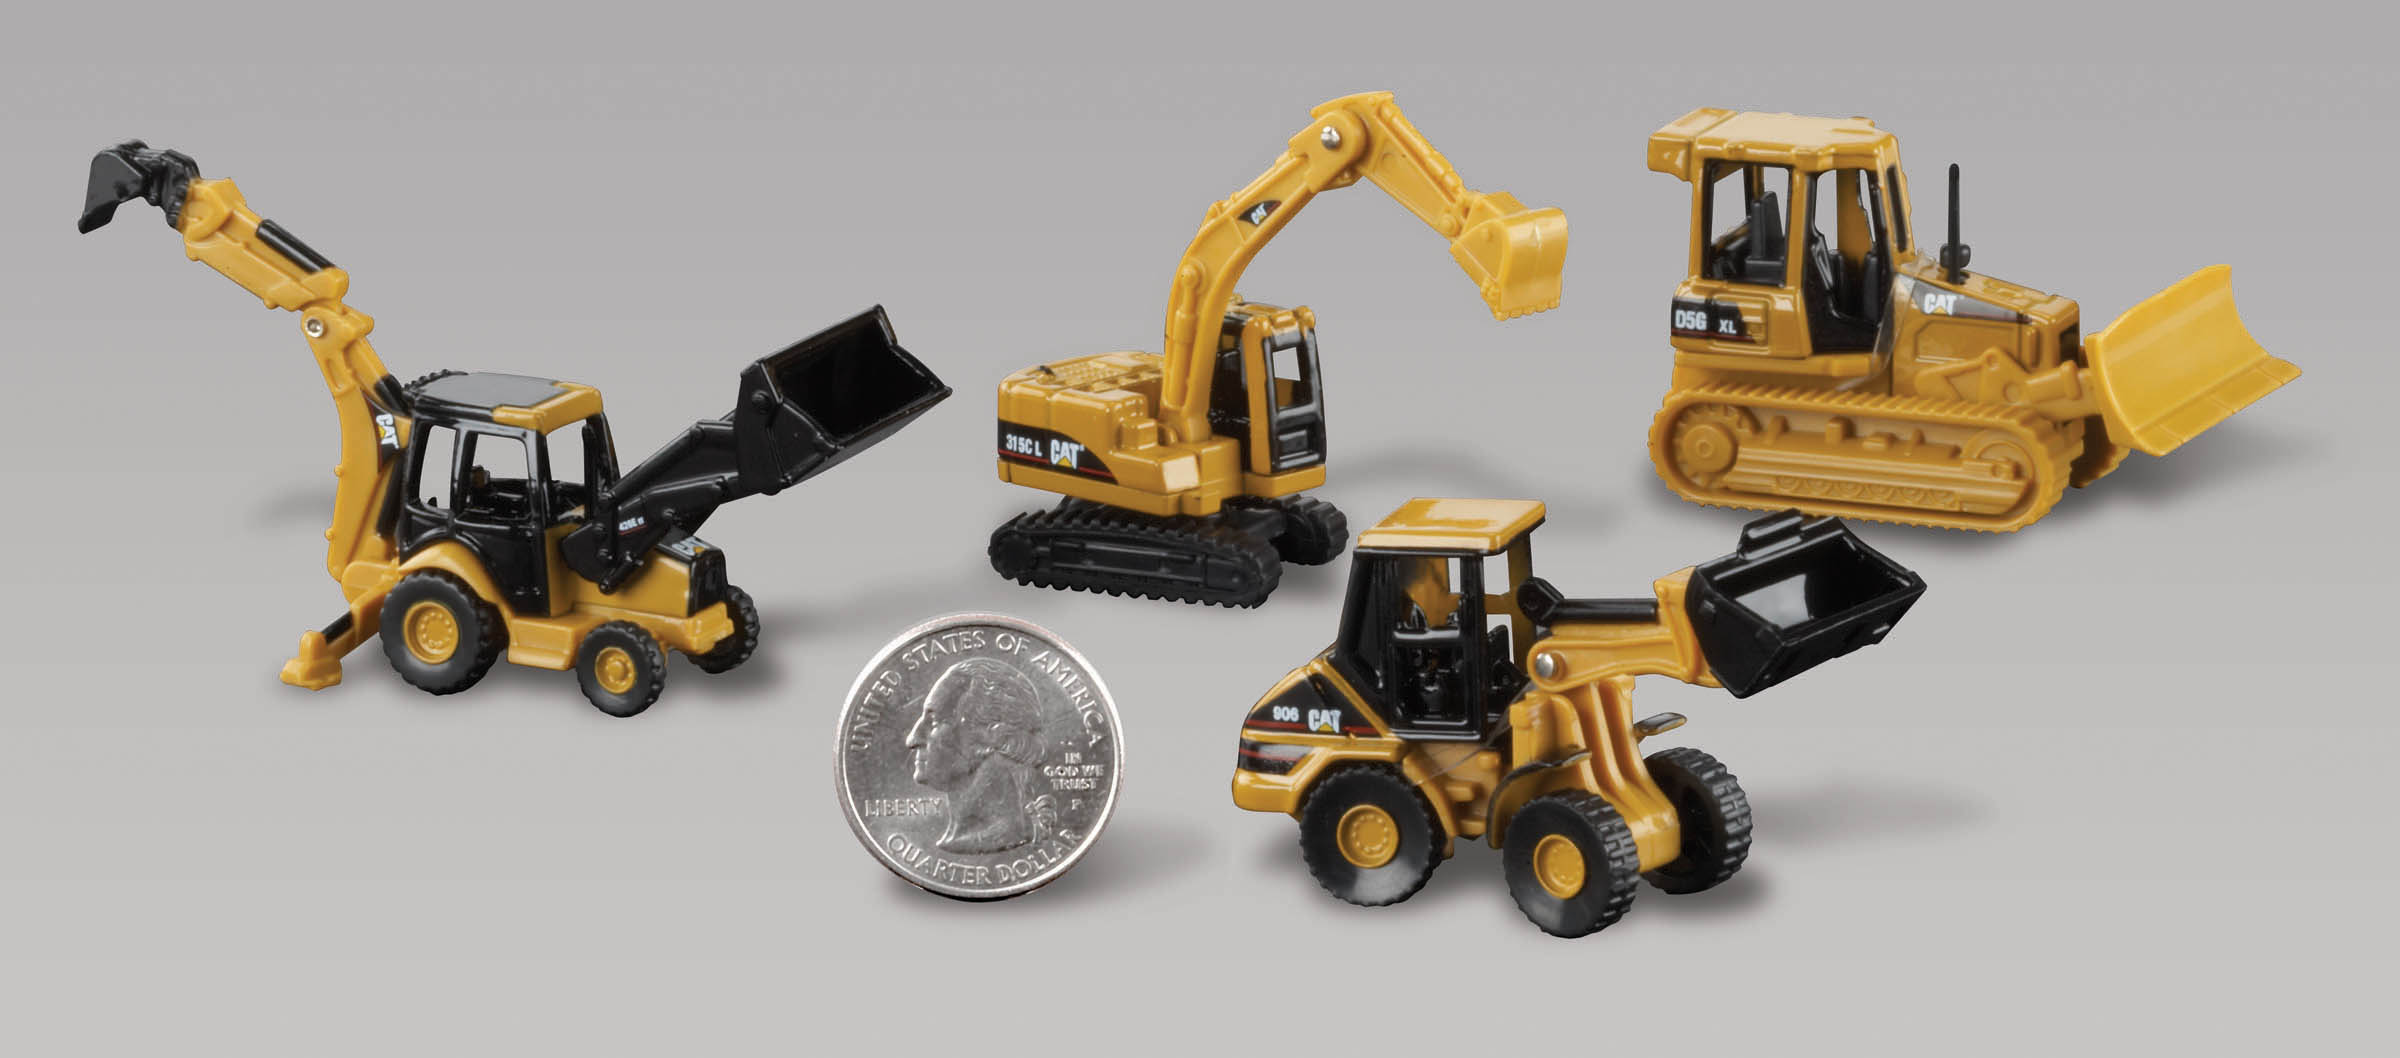 Caterpillar Cat 315D L Hydraulic Excavator 1/160 Scale By Diecast Masters #85556